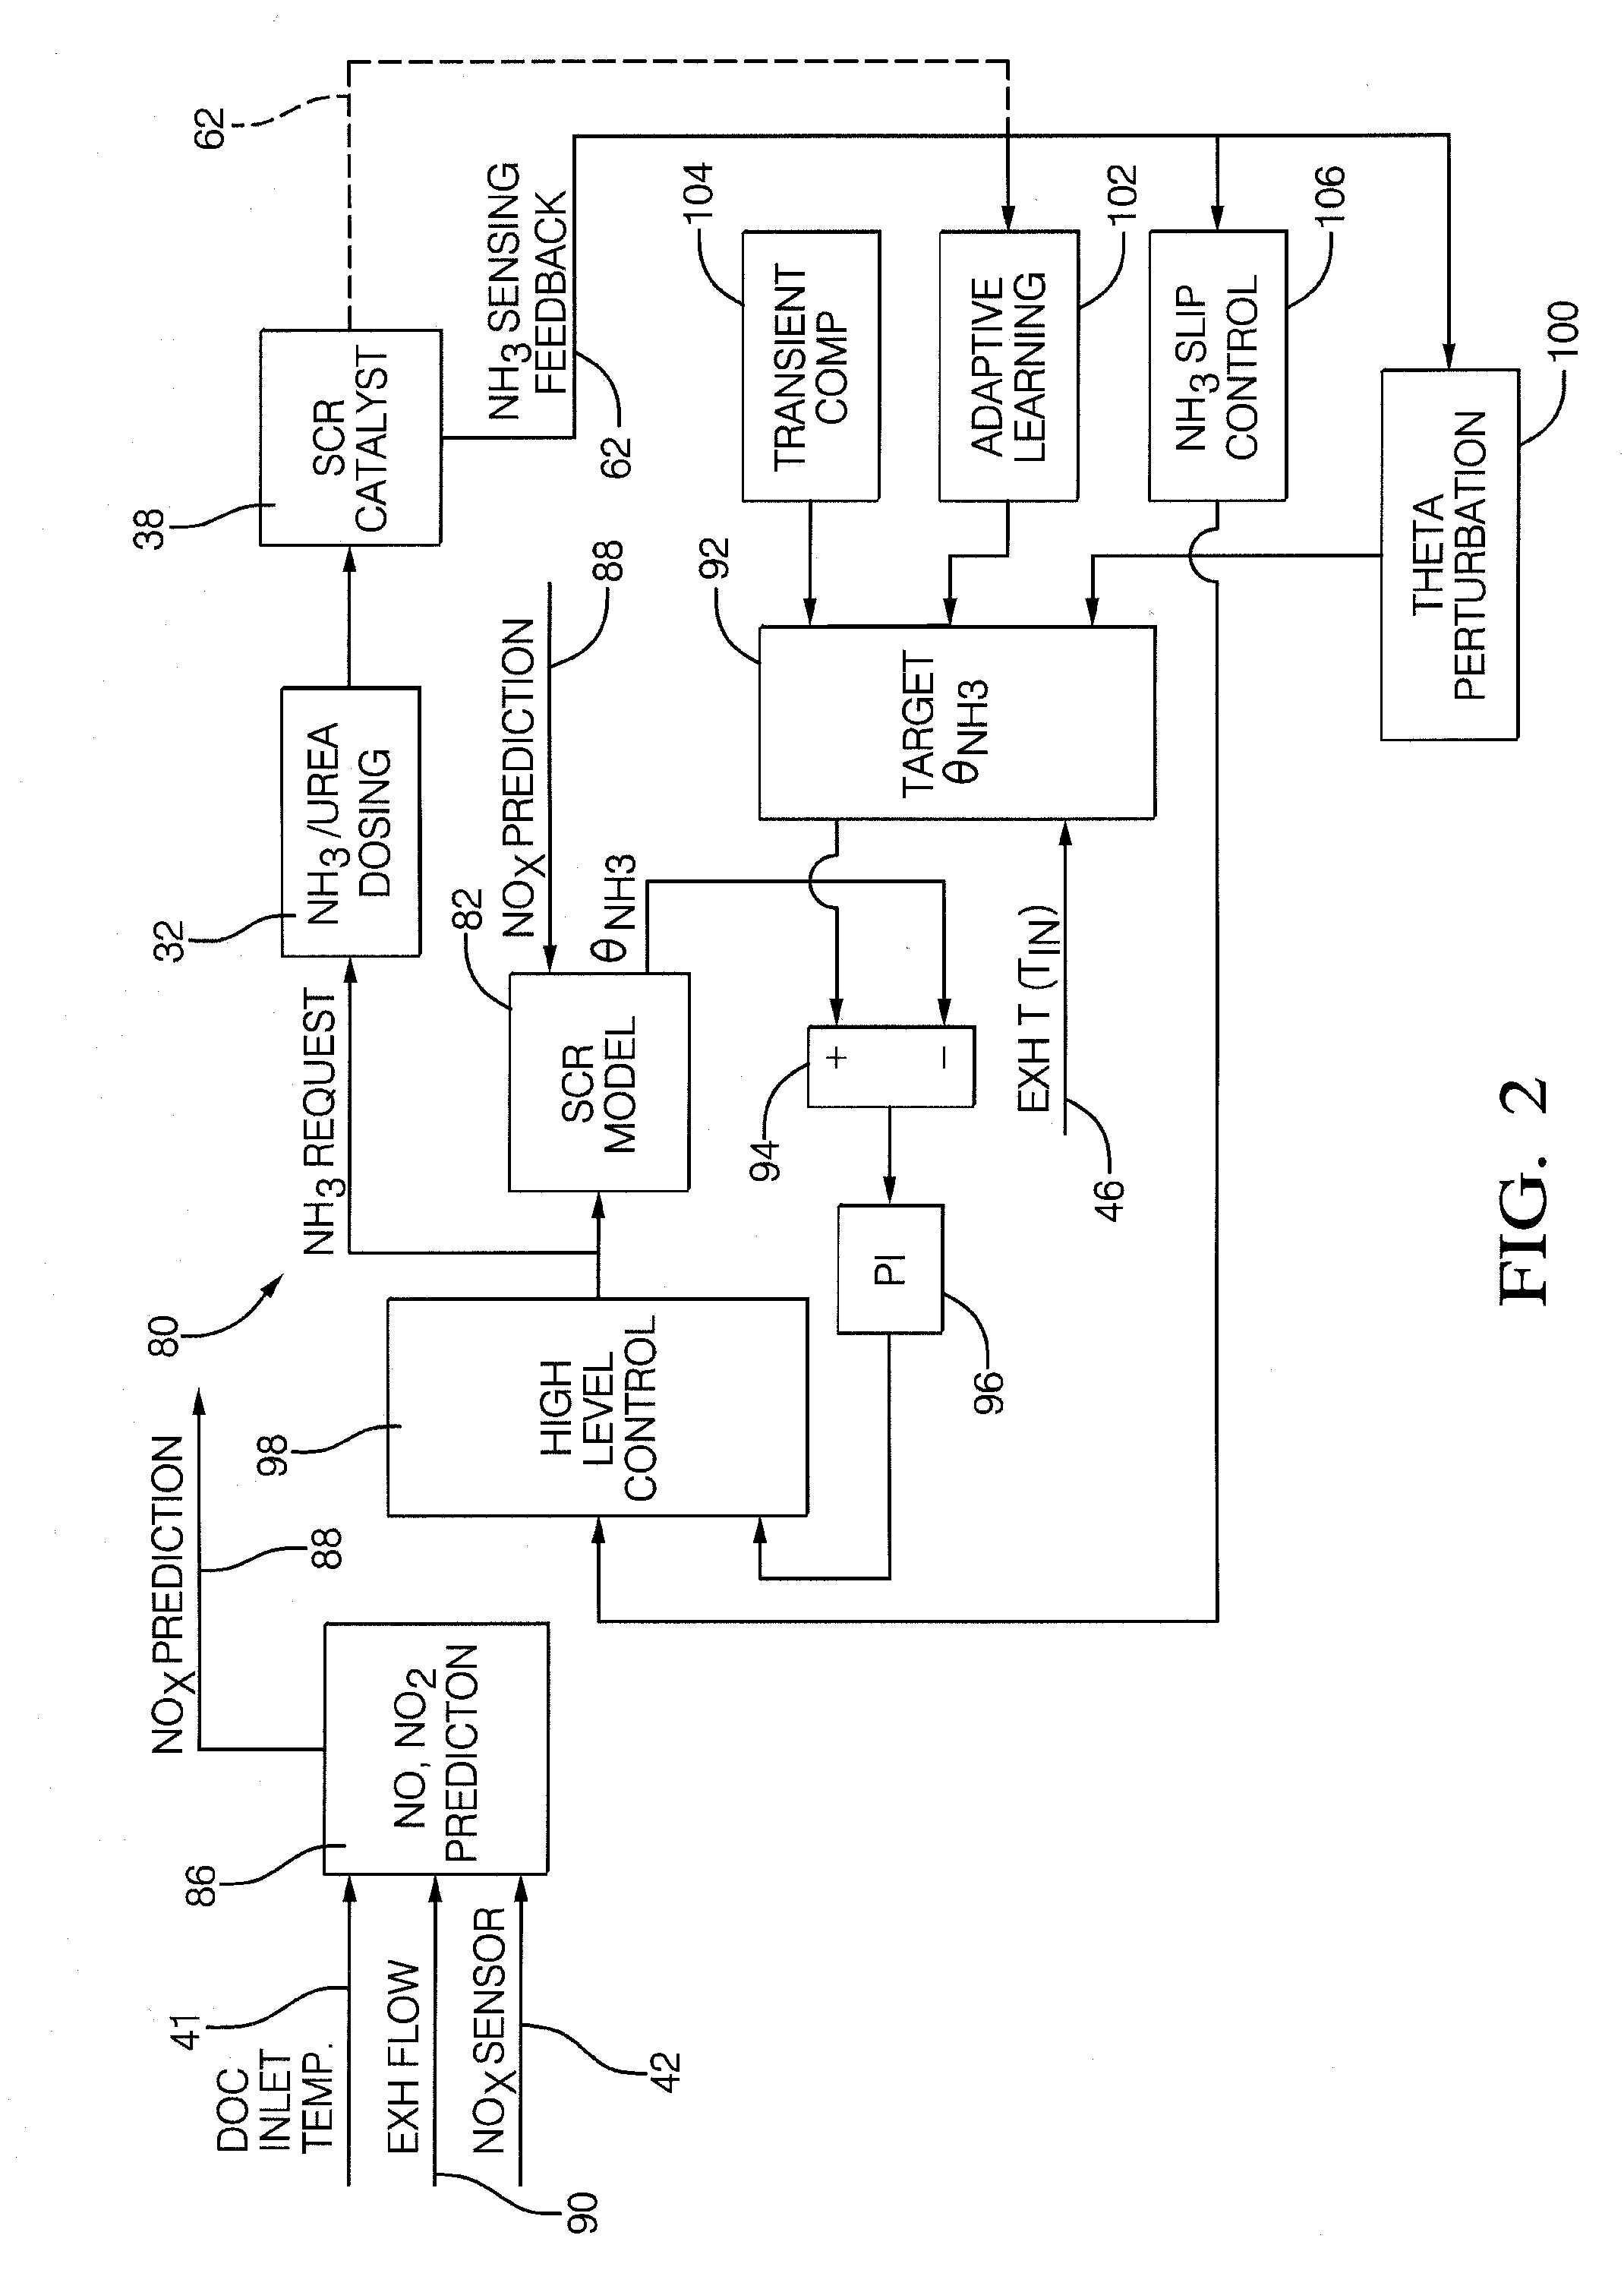 Diagnostic methods for selective catalytic reduction (SCR) exhaust treatment system